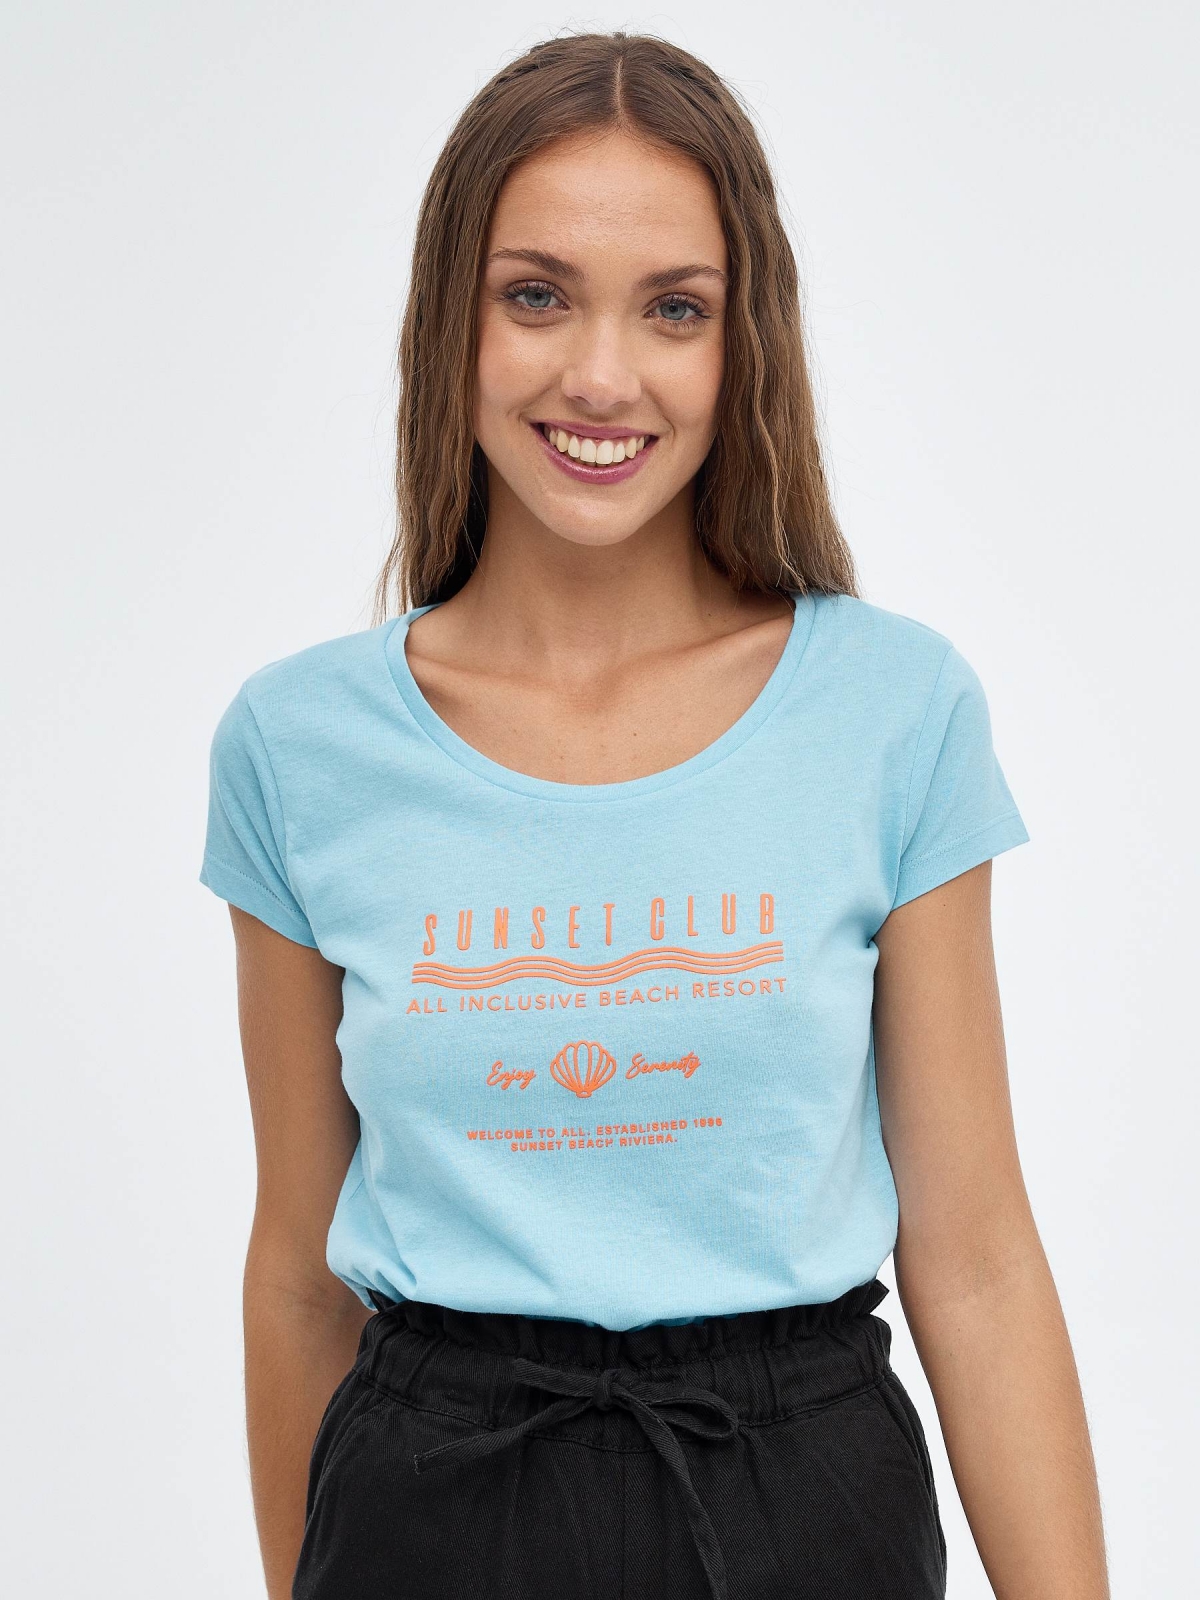 Sunsetclub crop top light blue middle front view